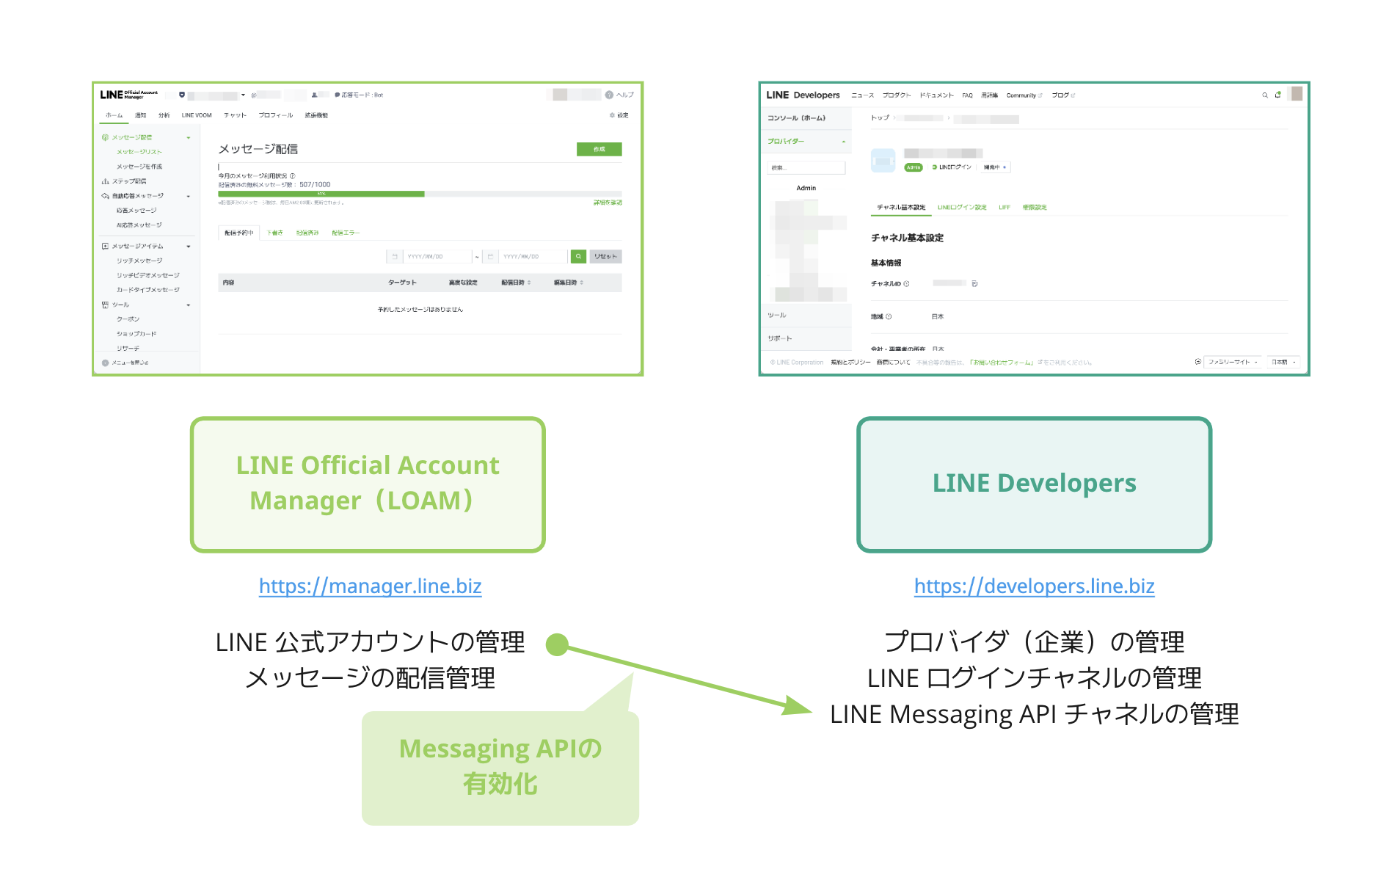 LINE Official Account Manager と LINE Developers